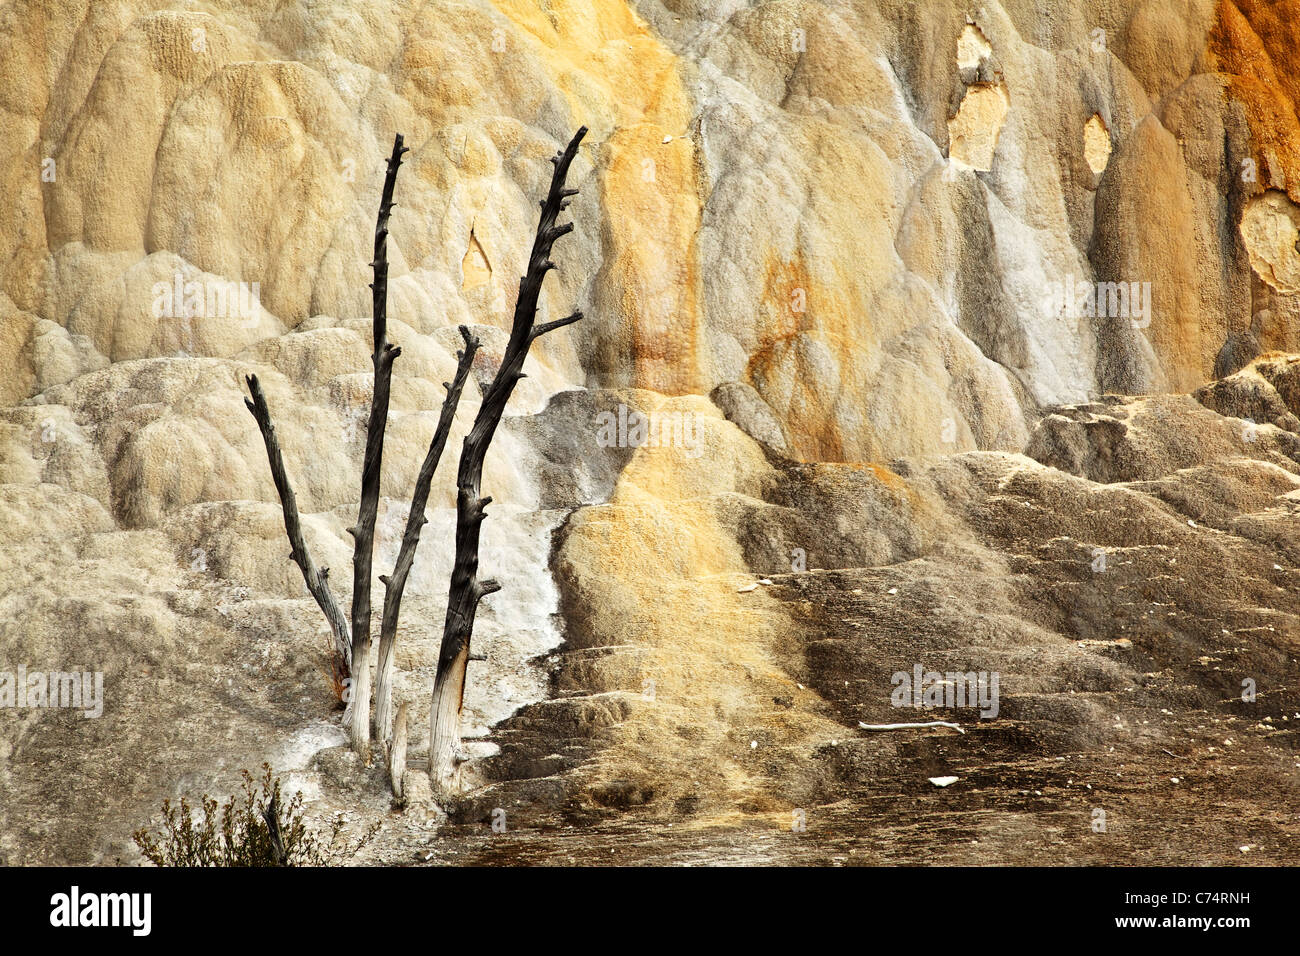 Dead tree overtaken by travertine terrace at Mammoth Hot Springs, Yellowstone National Park, Wyoming, USA Stock Photo